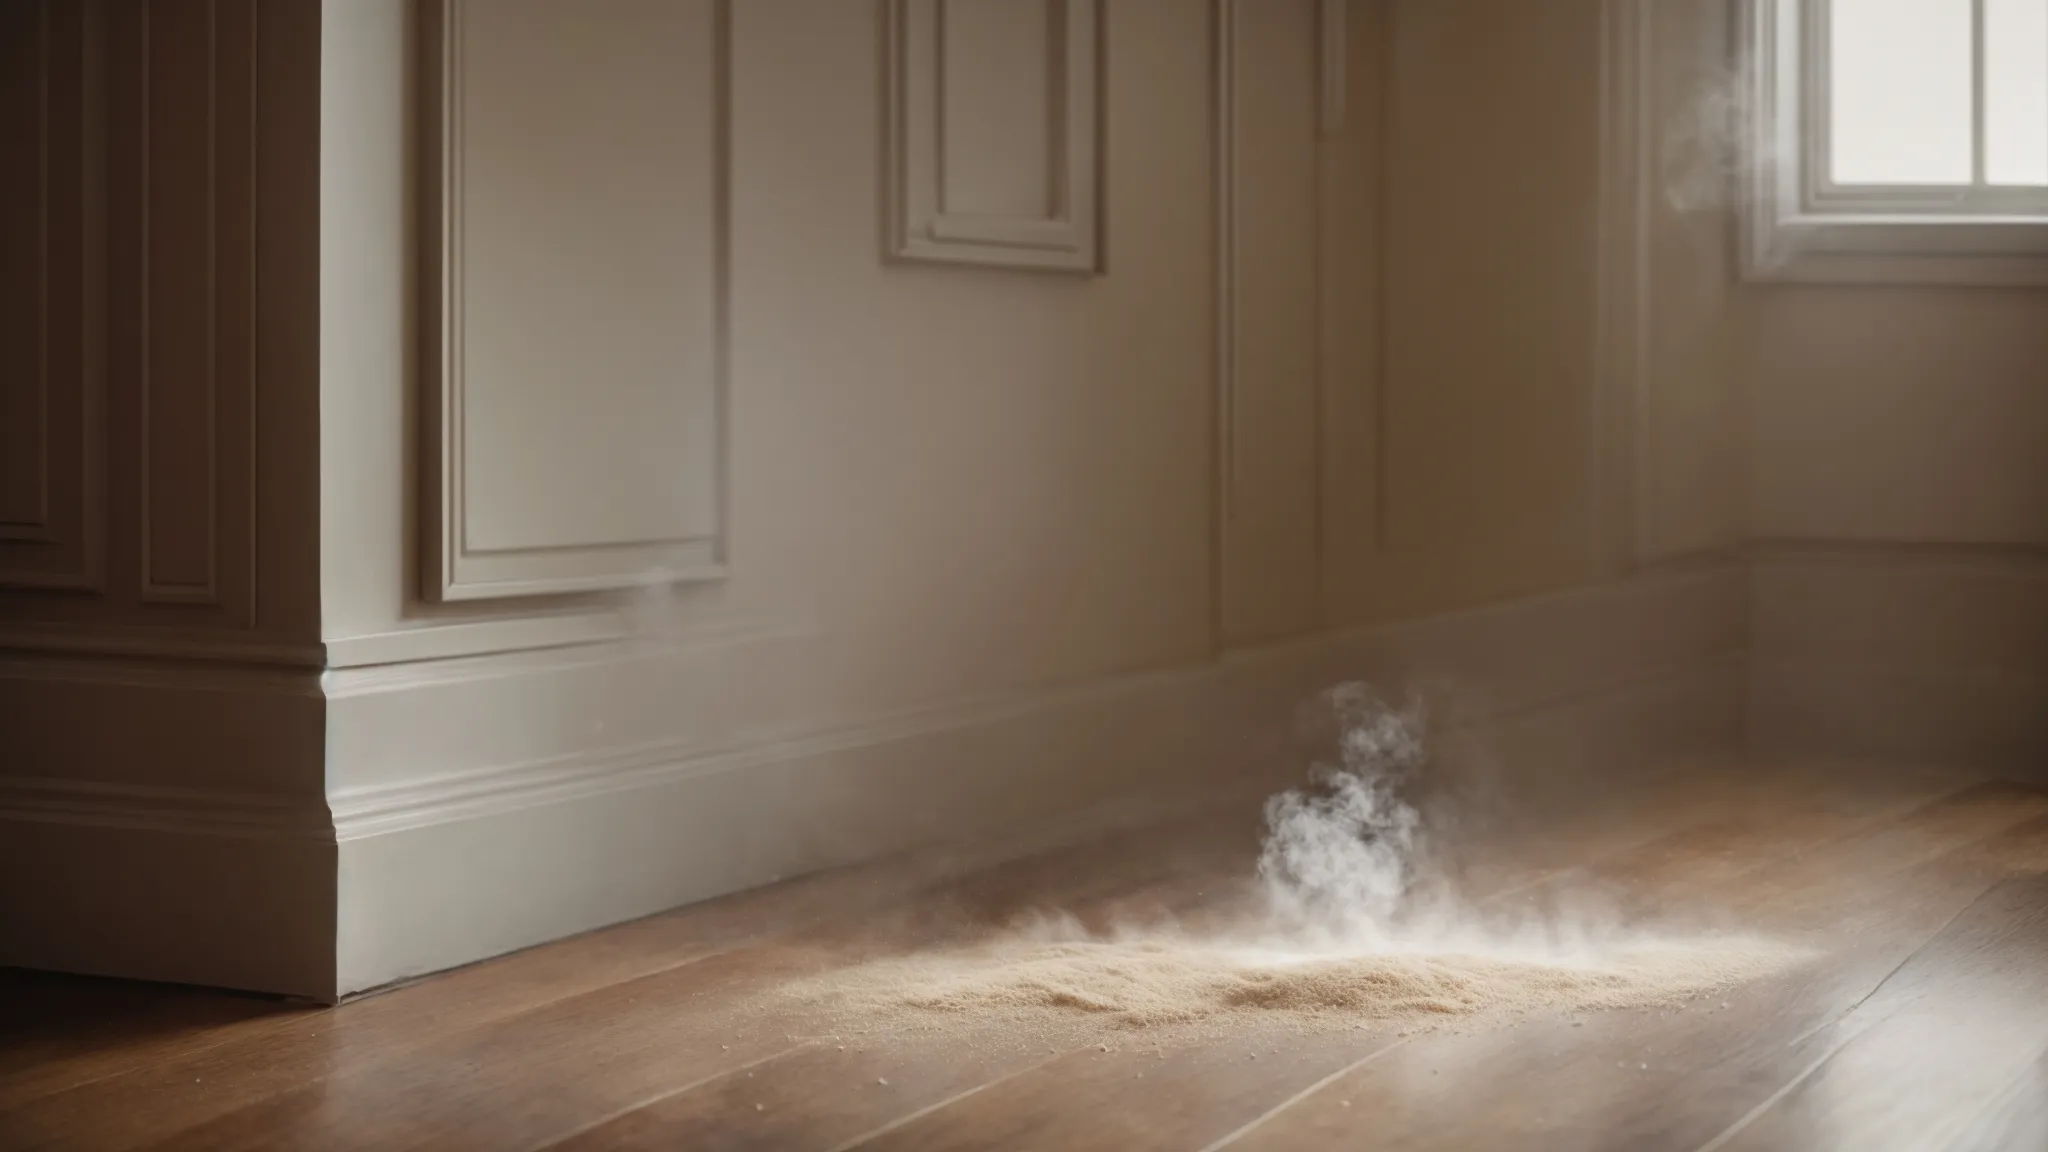 a room showing visible dust particles in the air with an hvac vent prominently visible on the wall.